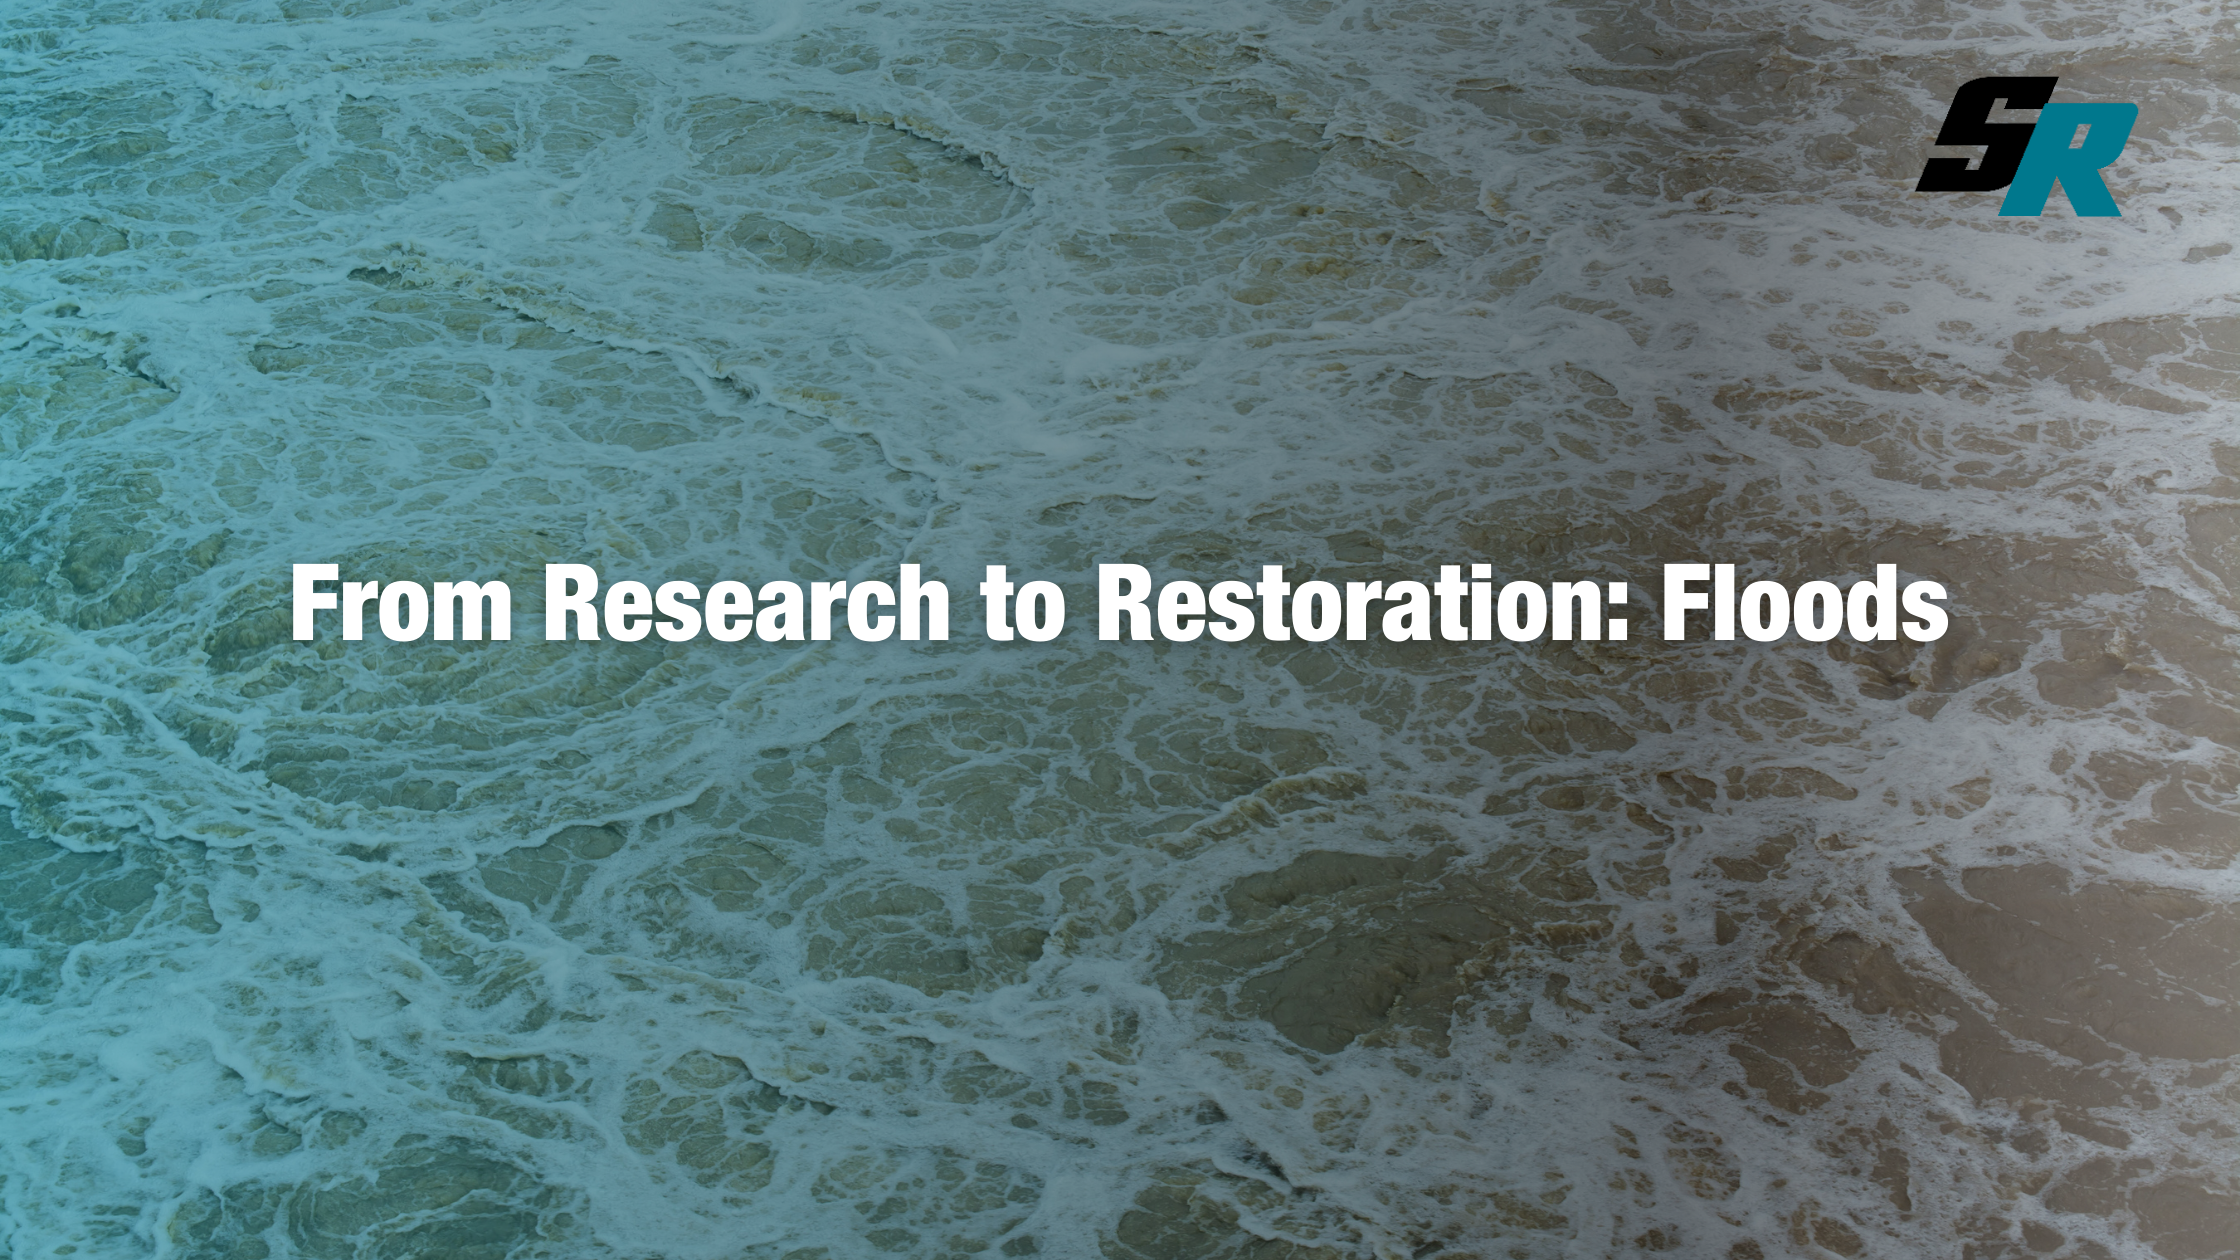 From Research to Restoration: Floods